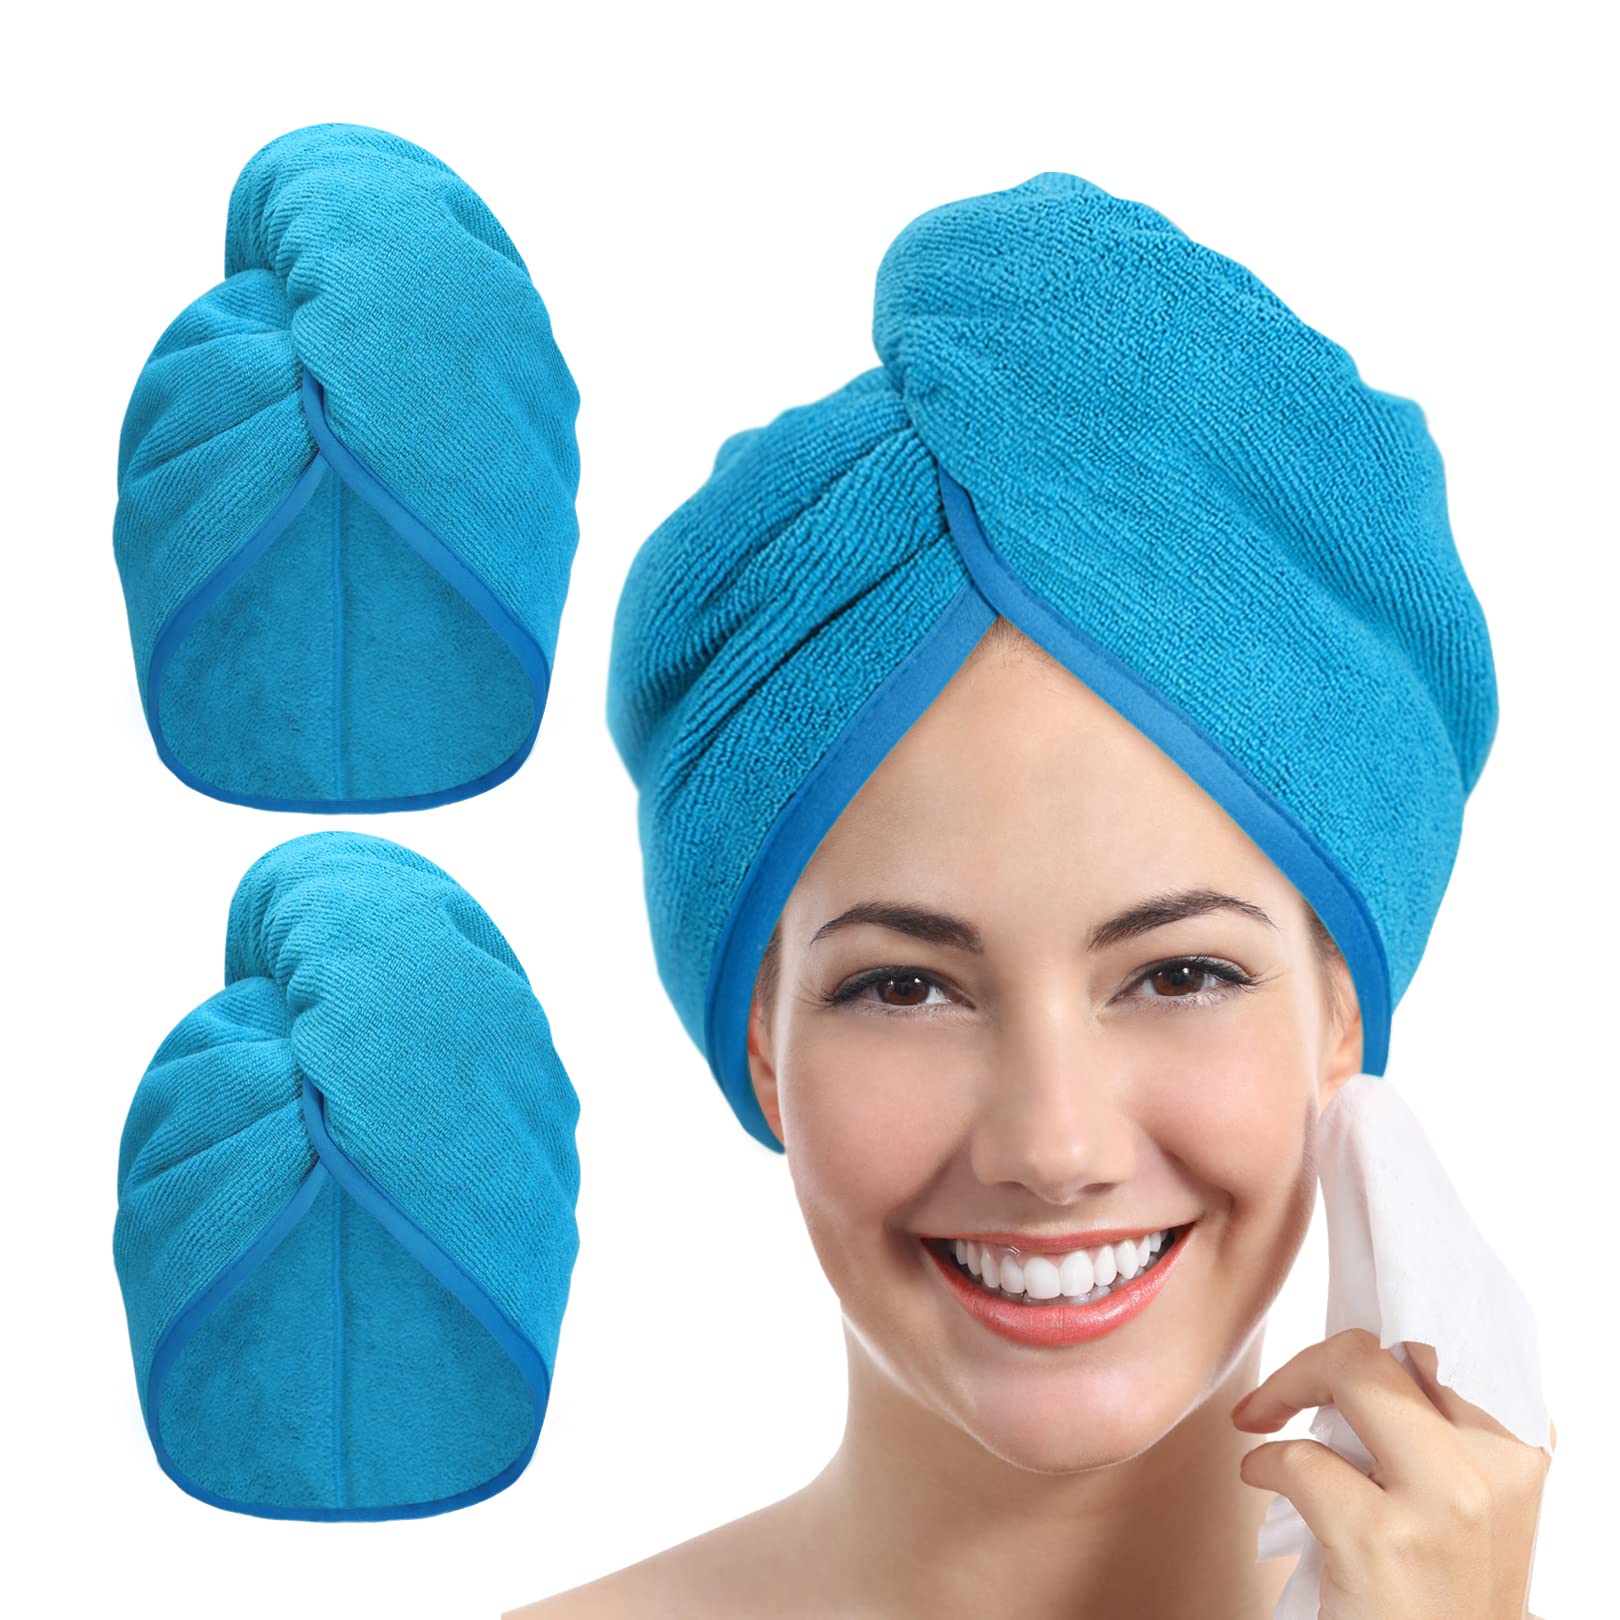 2-Pack YoulerTex Women's Super Absorbent Quick Dry Microfiber Hair Towel Wrap (Sky Blue) $2.80 ($1.40 each) + Free Shipping w/ Prime or on $35+